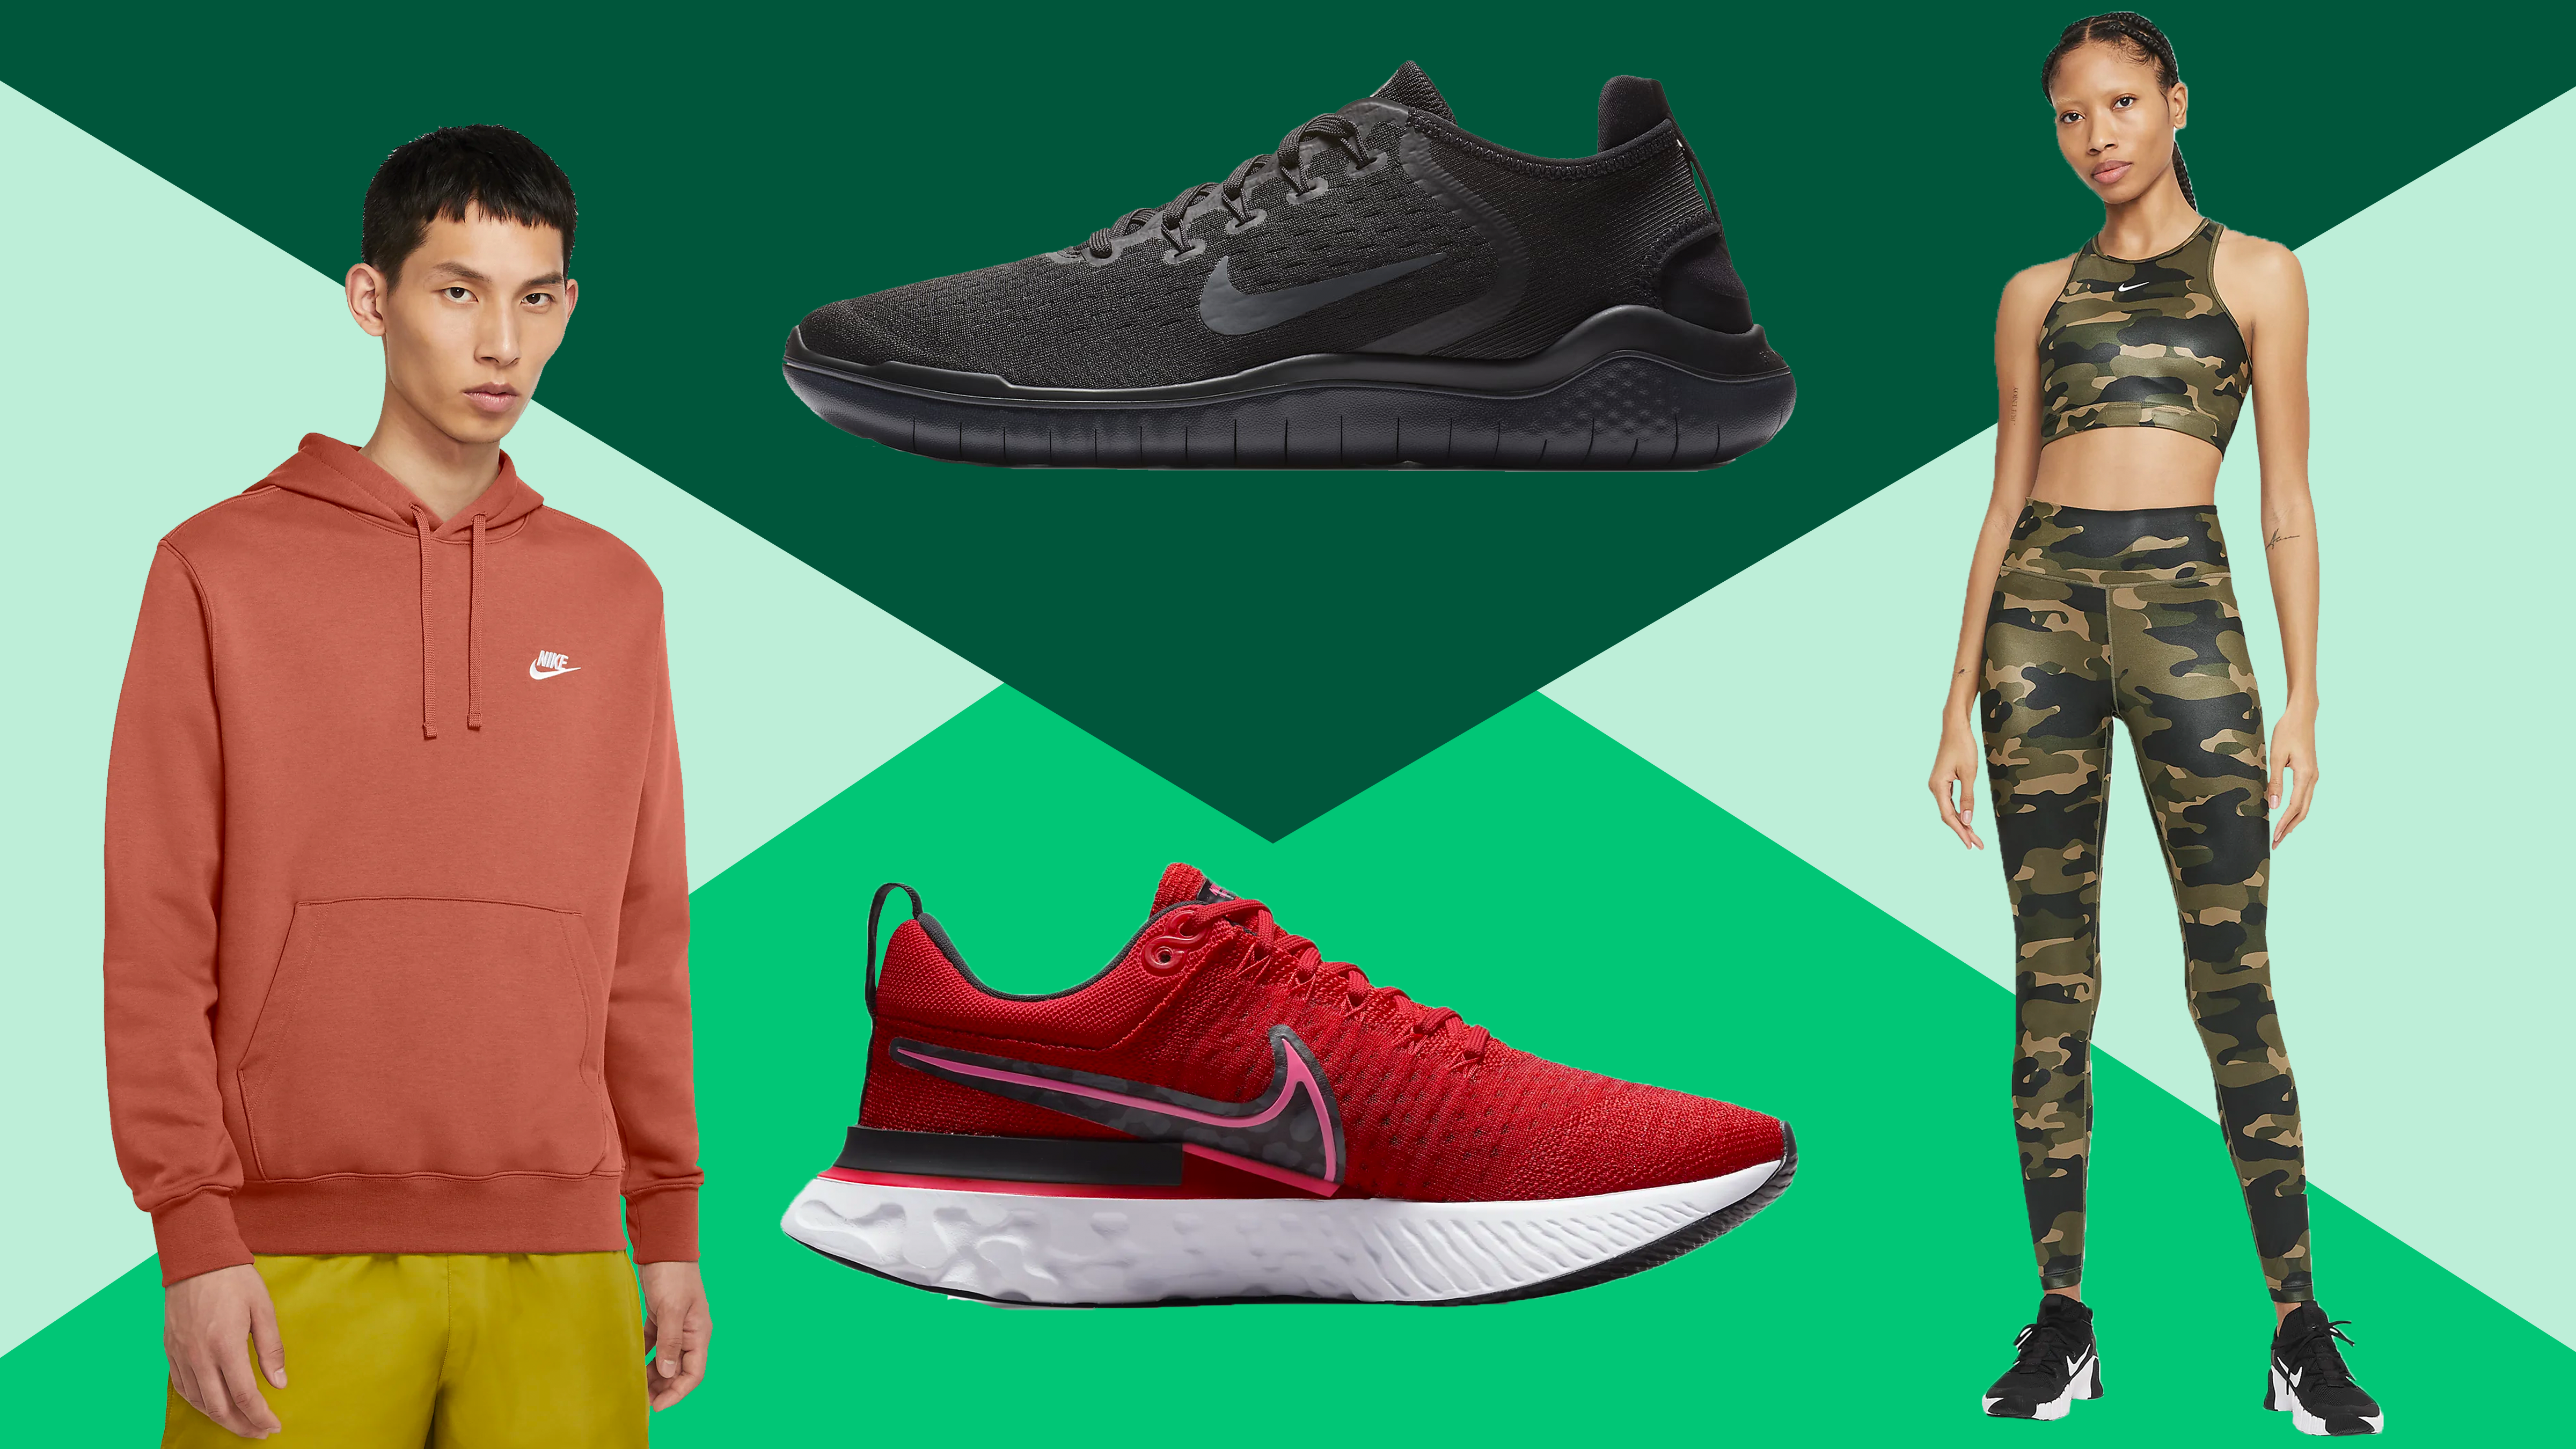 Nike shoes sale: Save up to 50% on last 